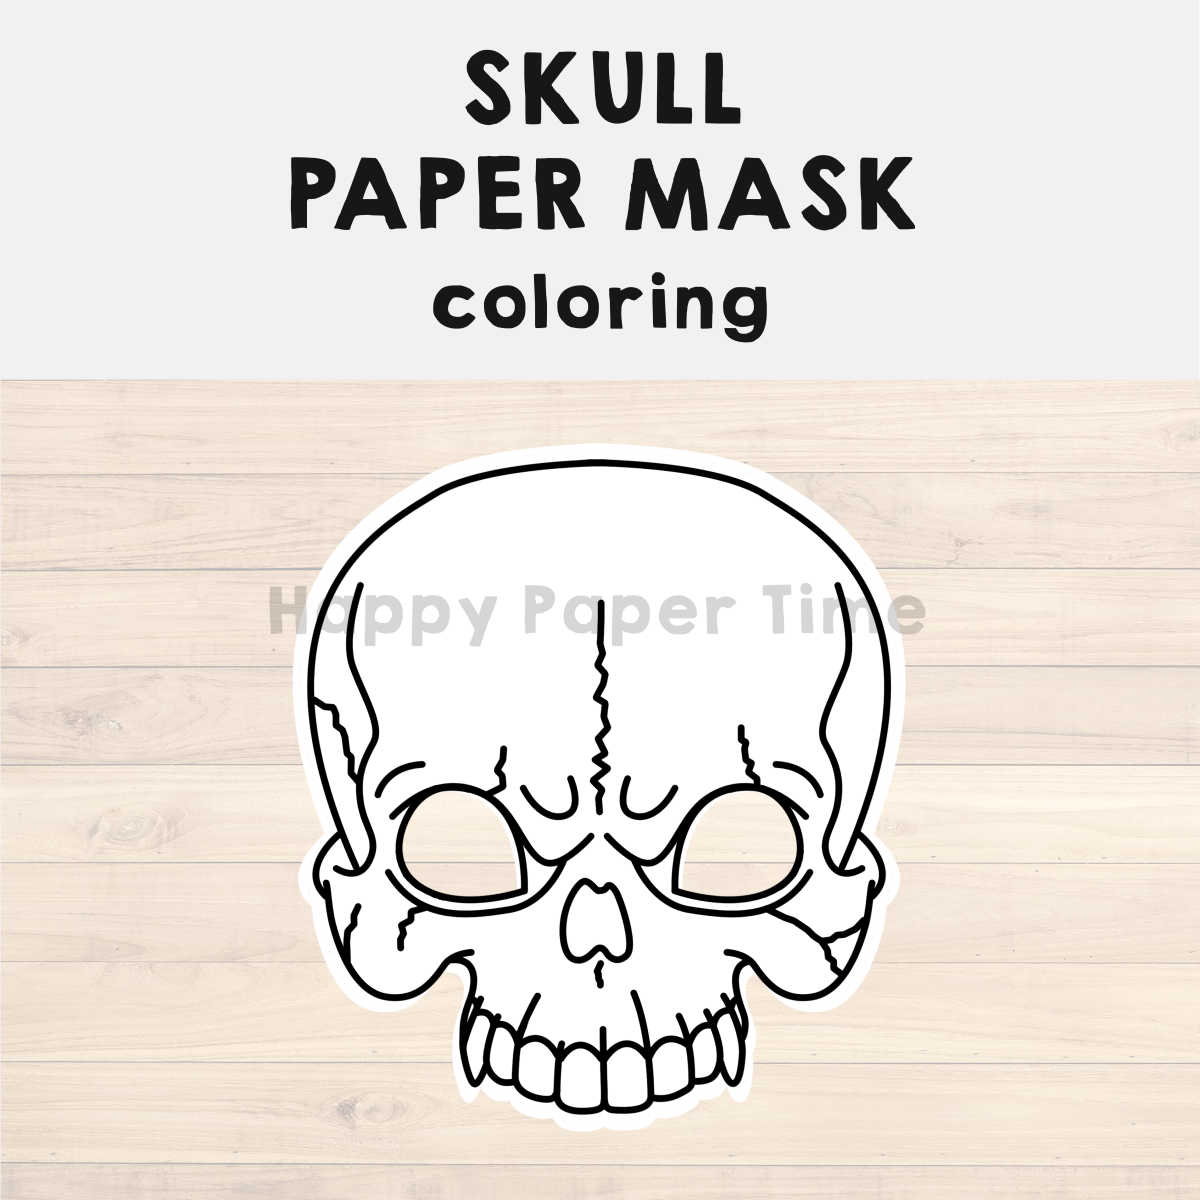 Skull paper mask printable halloween coloring costume craft activity made by teachers